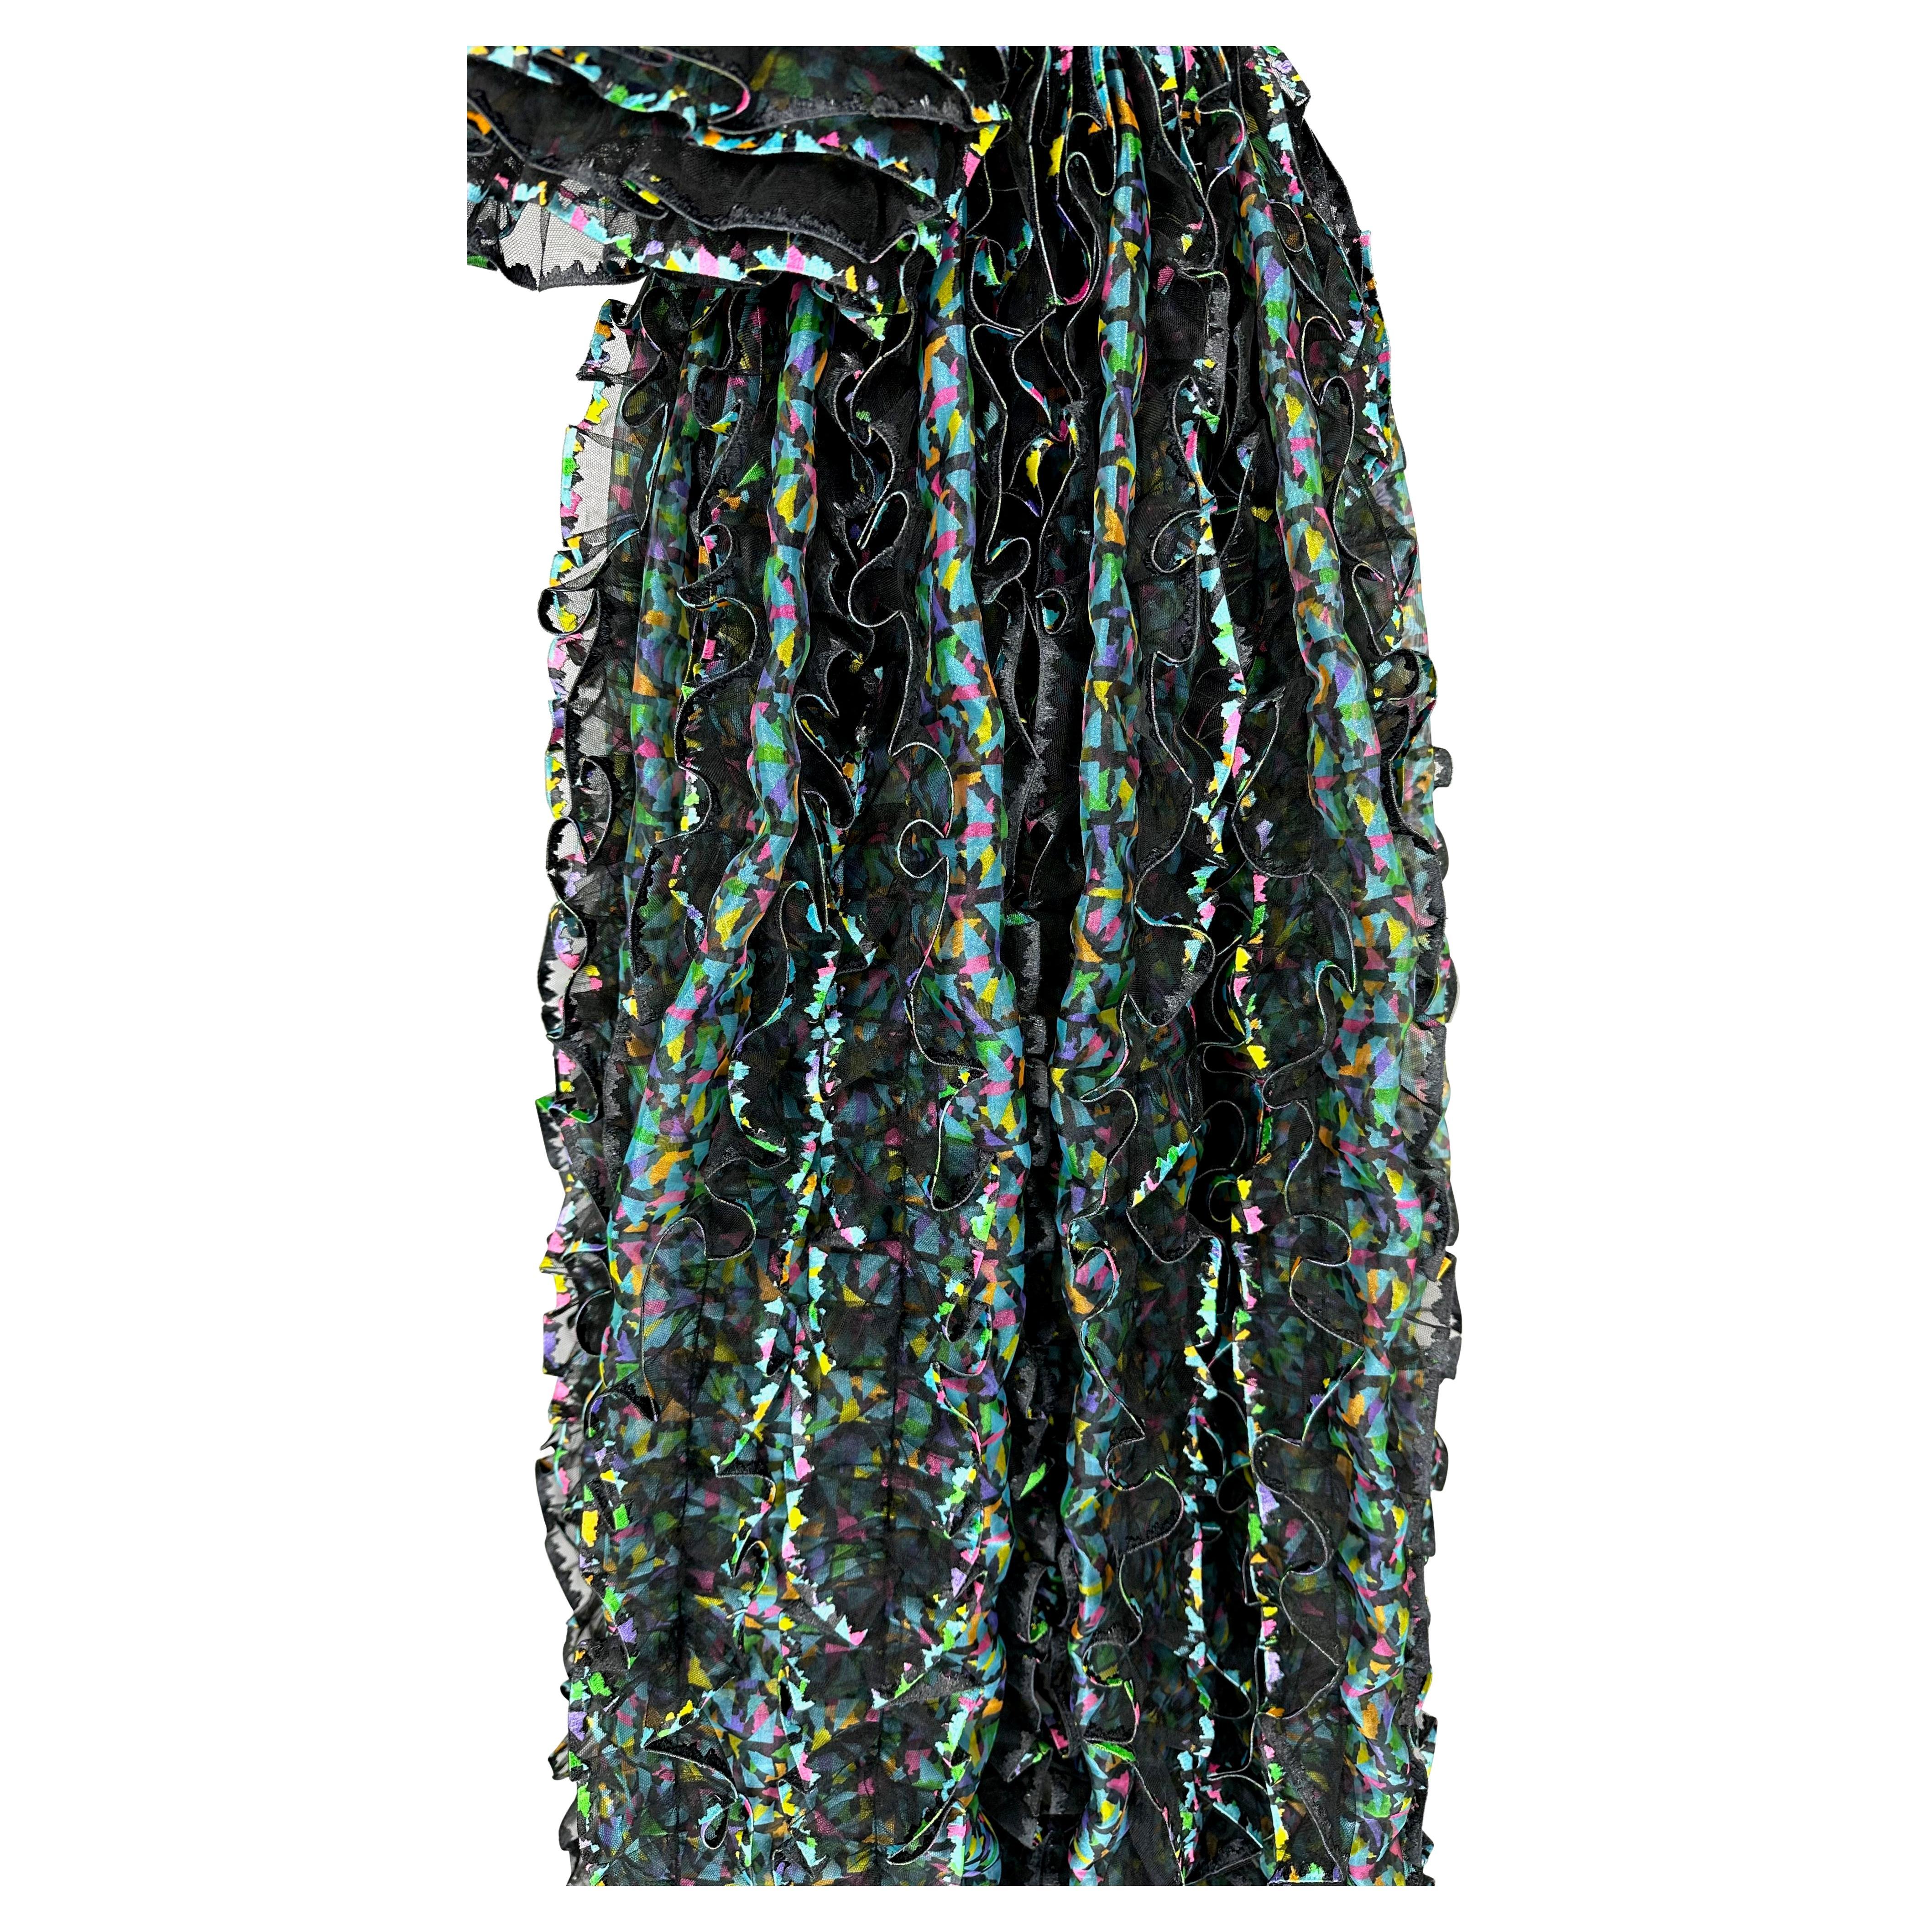 S/S 1987 Paco Rabanne Haute Couture Runway Sheer Embroidered Ruffle Gown For Sale 3